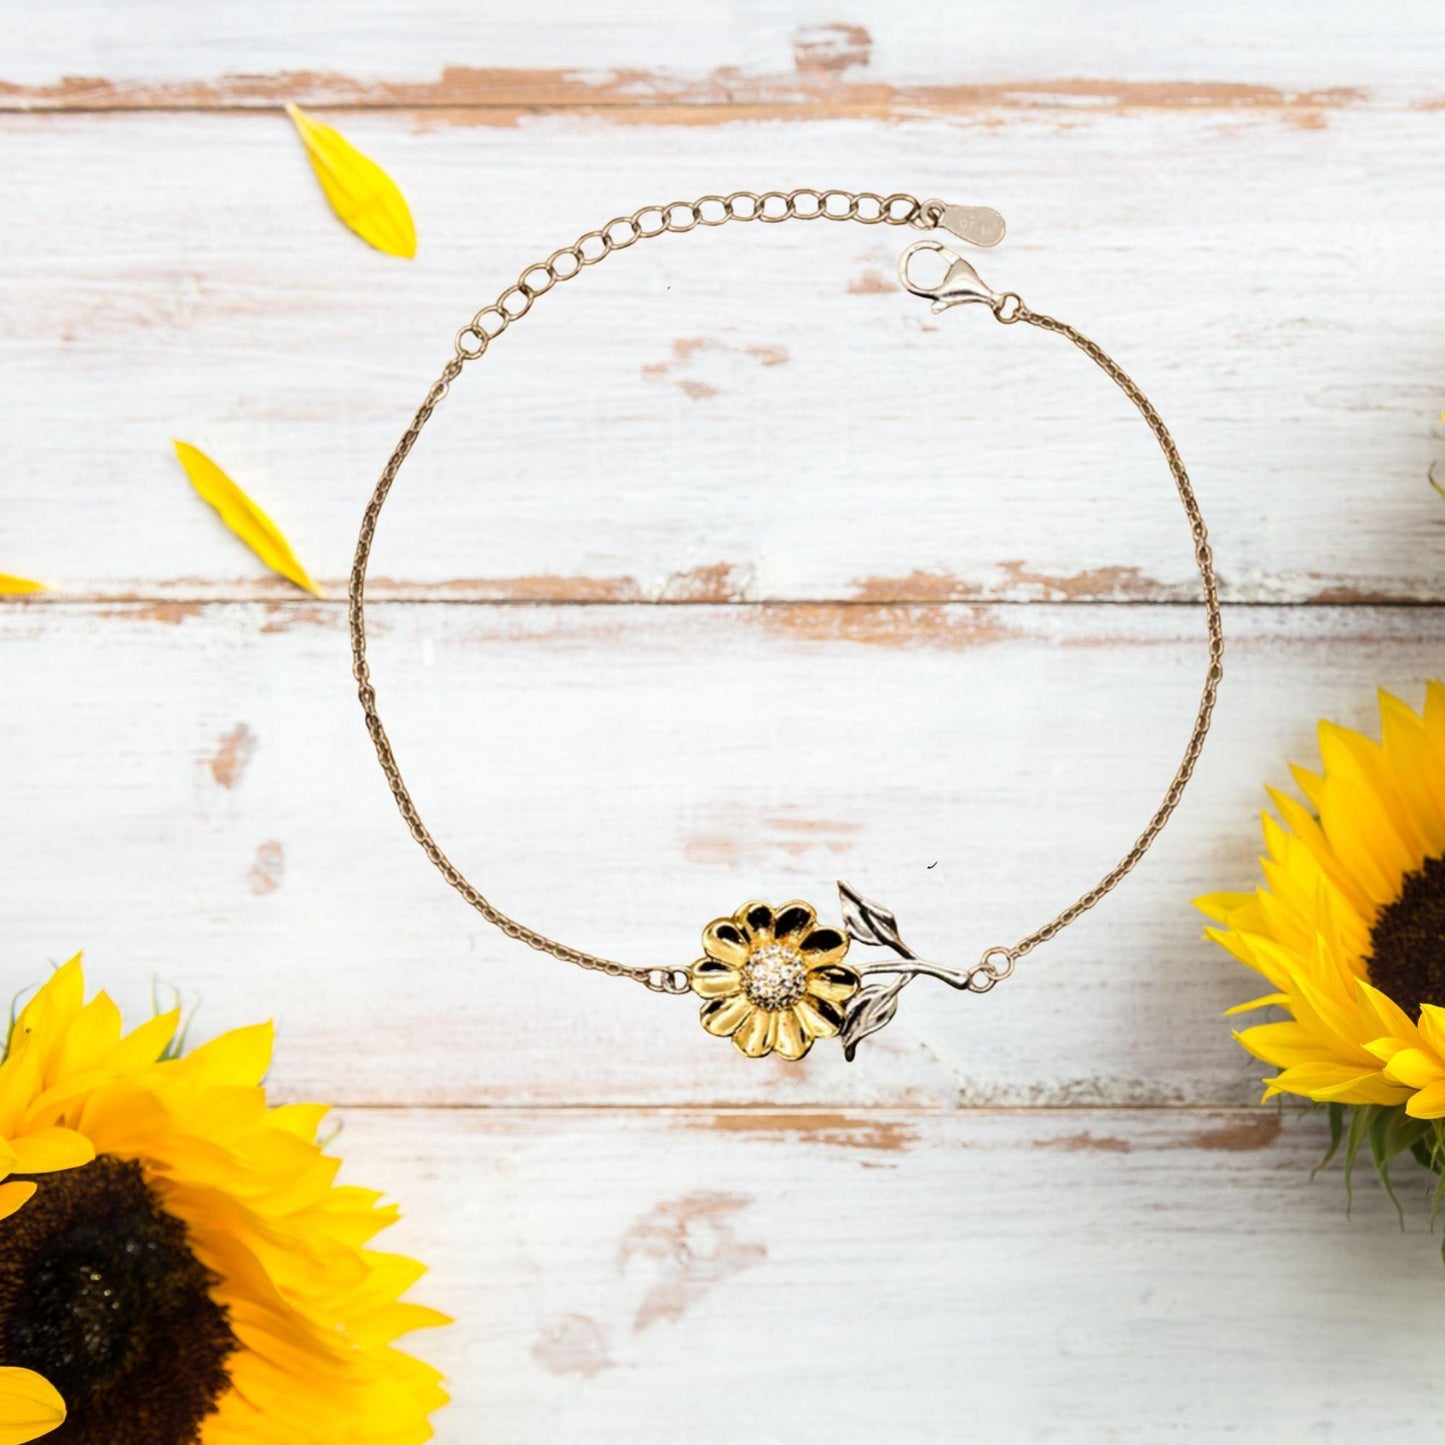 Motivational Son Sunflower Bracelet- I can promise to love you for the rest of my life, Birthday, Christmas Holiday Jewelry Gift - Mallard Moon Gift Shop